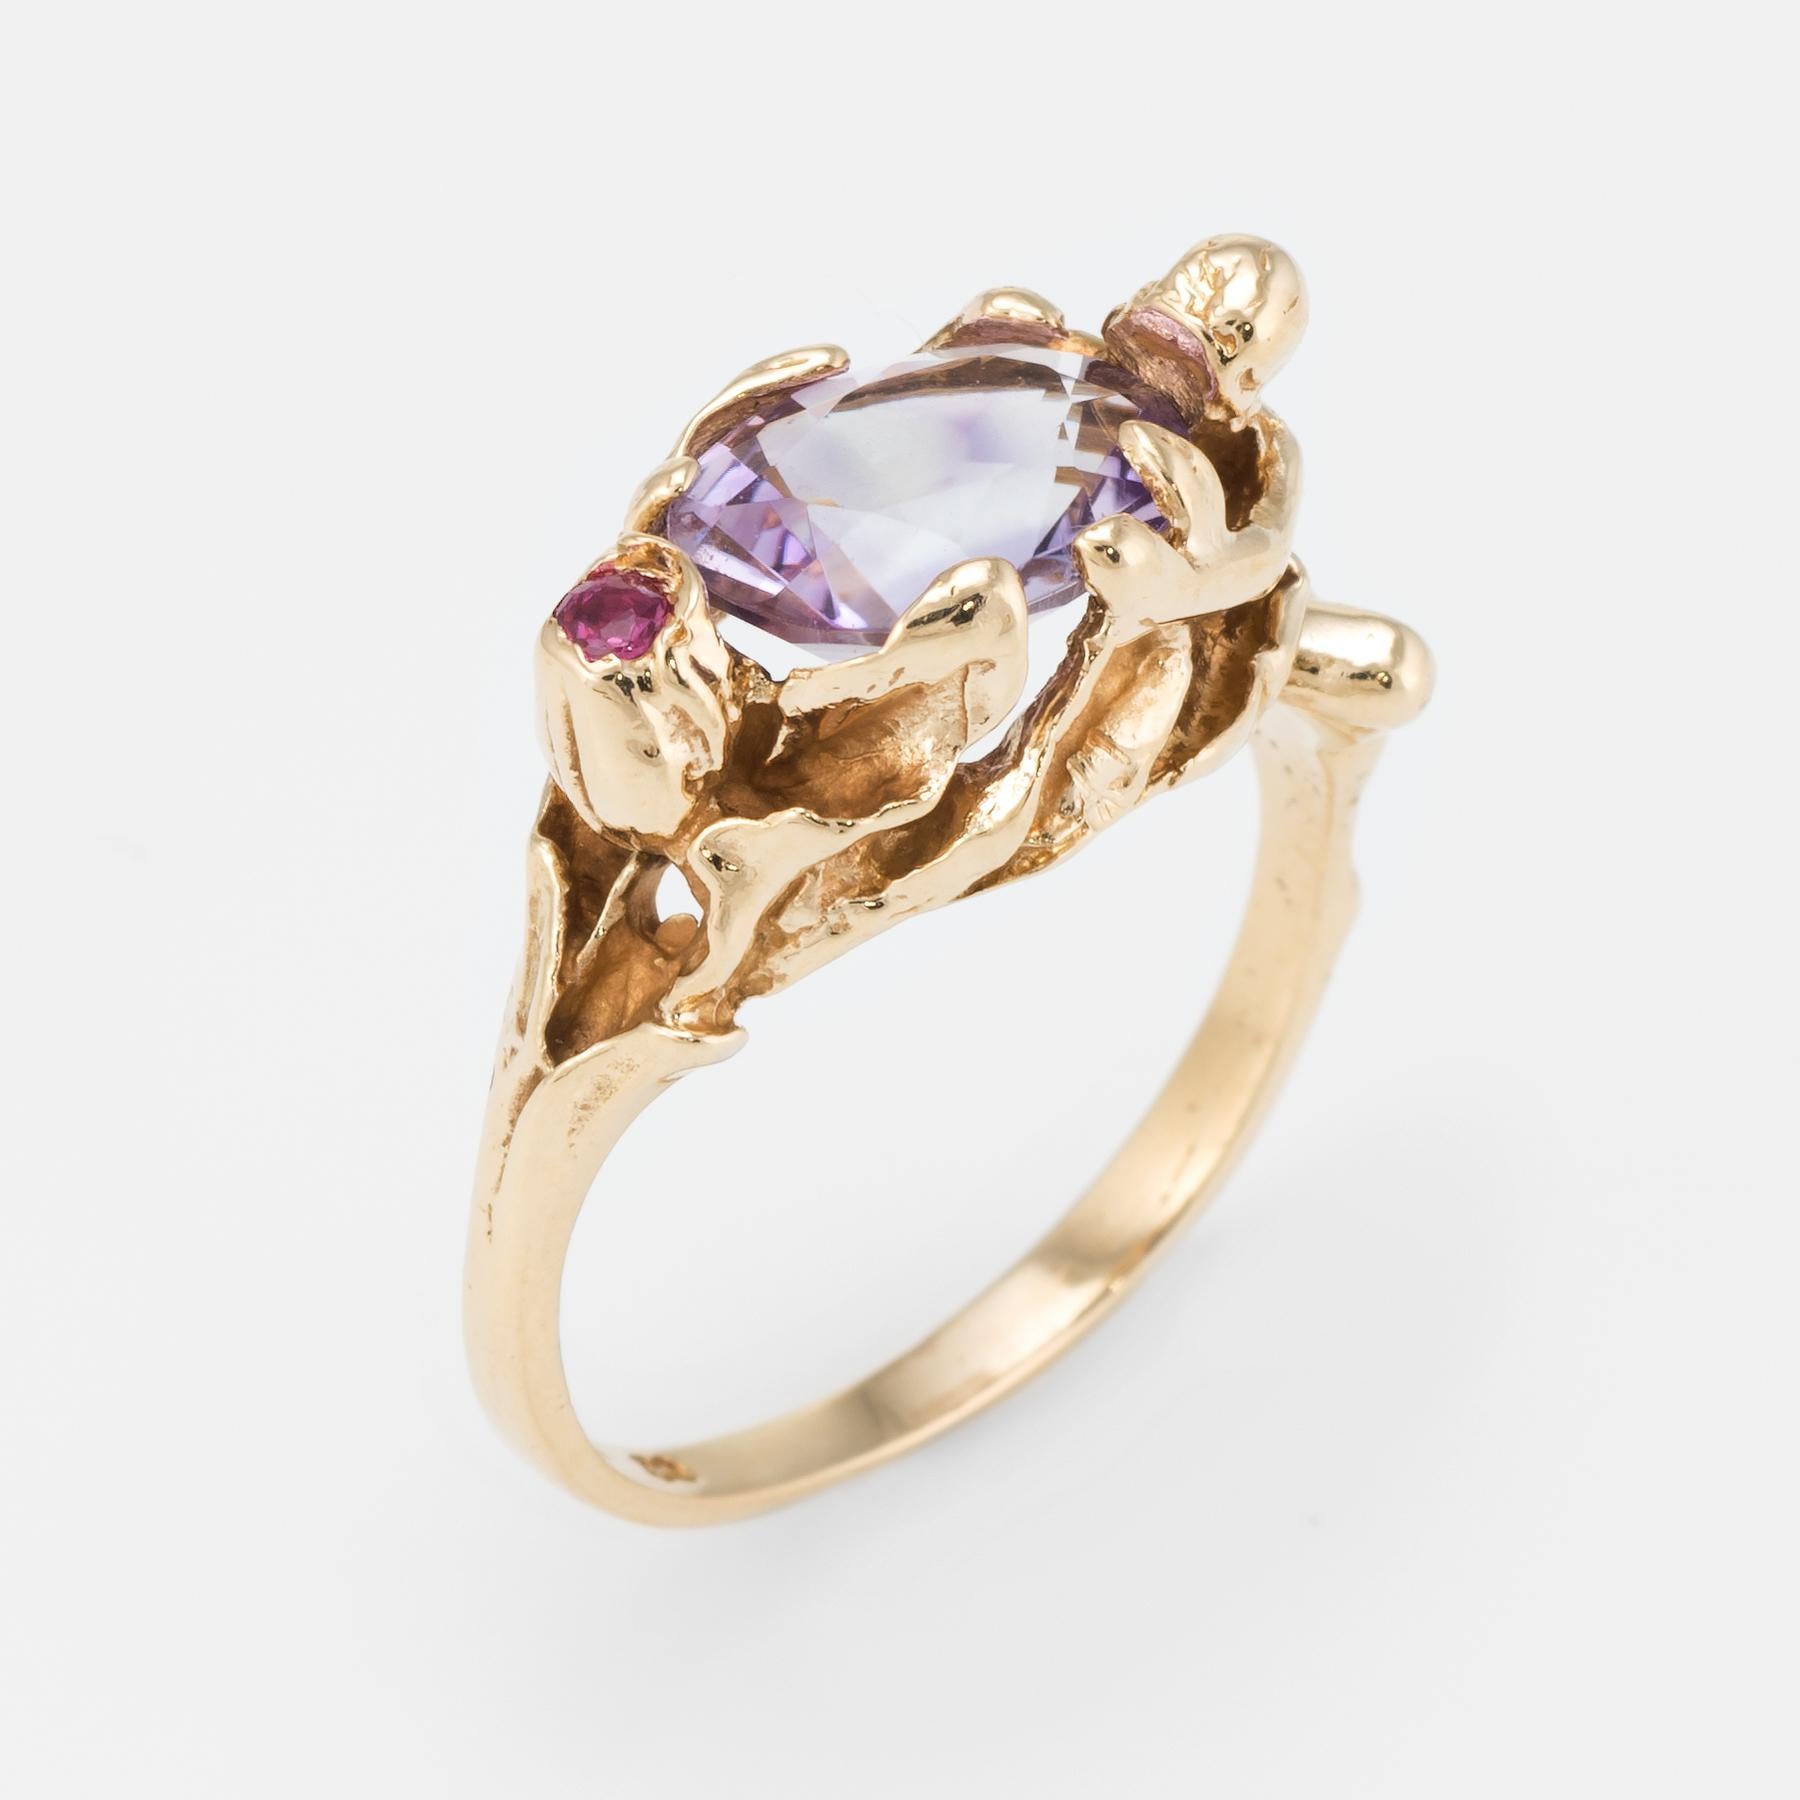 Finely detailed vintage ring, crafted in 14 karat yellow gold. 

Centrally mounted oval faceted amethyst measures 10mm x 8mm (estimated at 2.50 carats), accented with an estimated 0.02 carat ruby. The stones are in excellent condition and free of